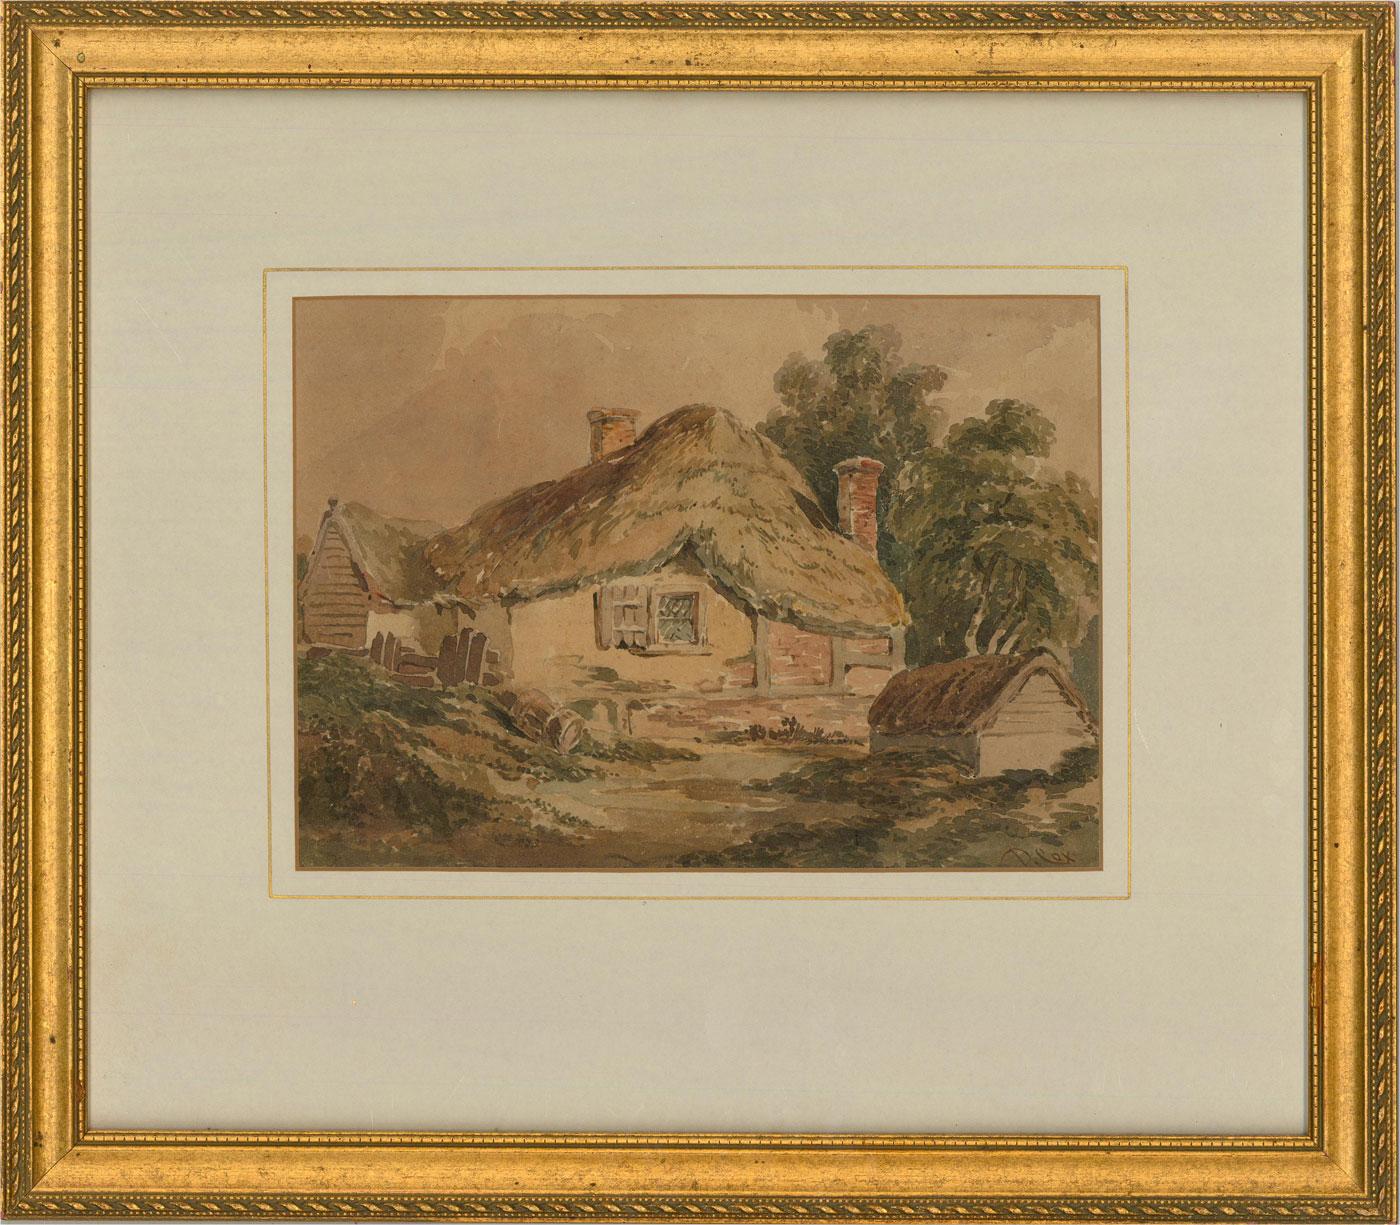 A painting of a historic thatched cottage by the prominent English landscape painter David Cox Snr. Presented glazed in a white mount with a gold window and a distressed gilt frame. Signed to the lower-right edge. On wove.
